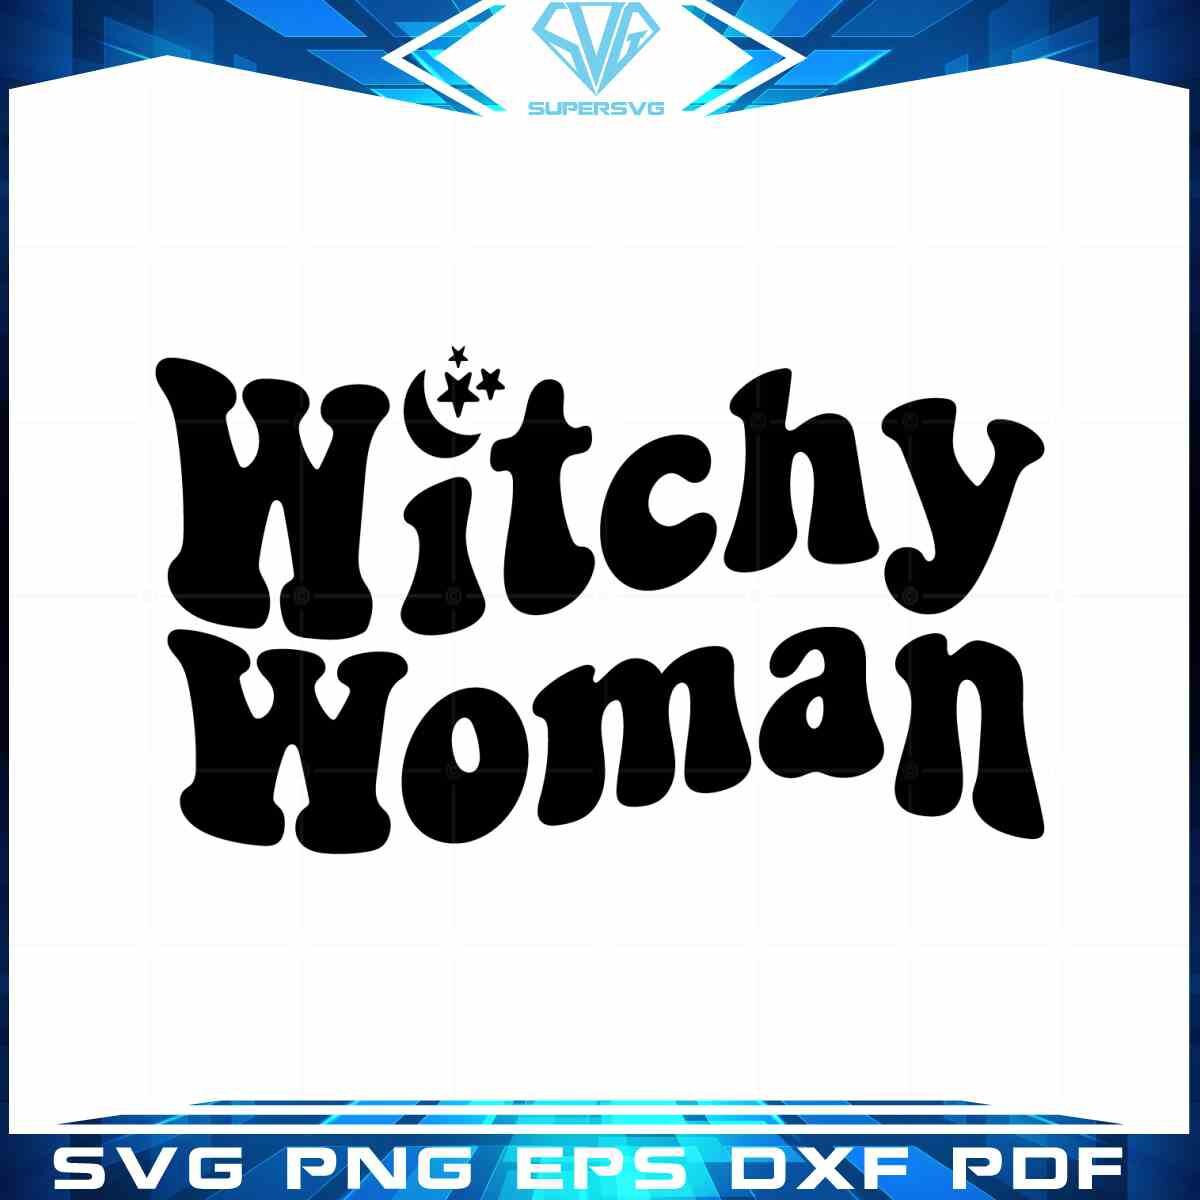 halloween-witchy-woman-groovy-svg-best-graphic-design-cutting-file